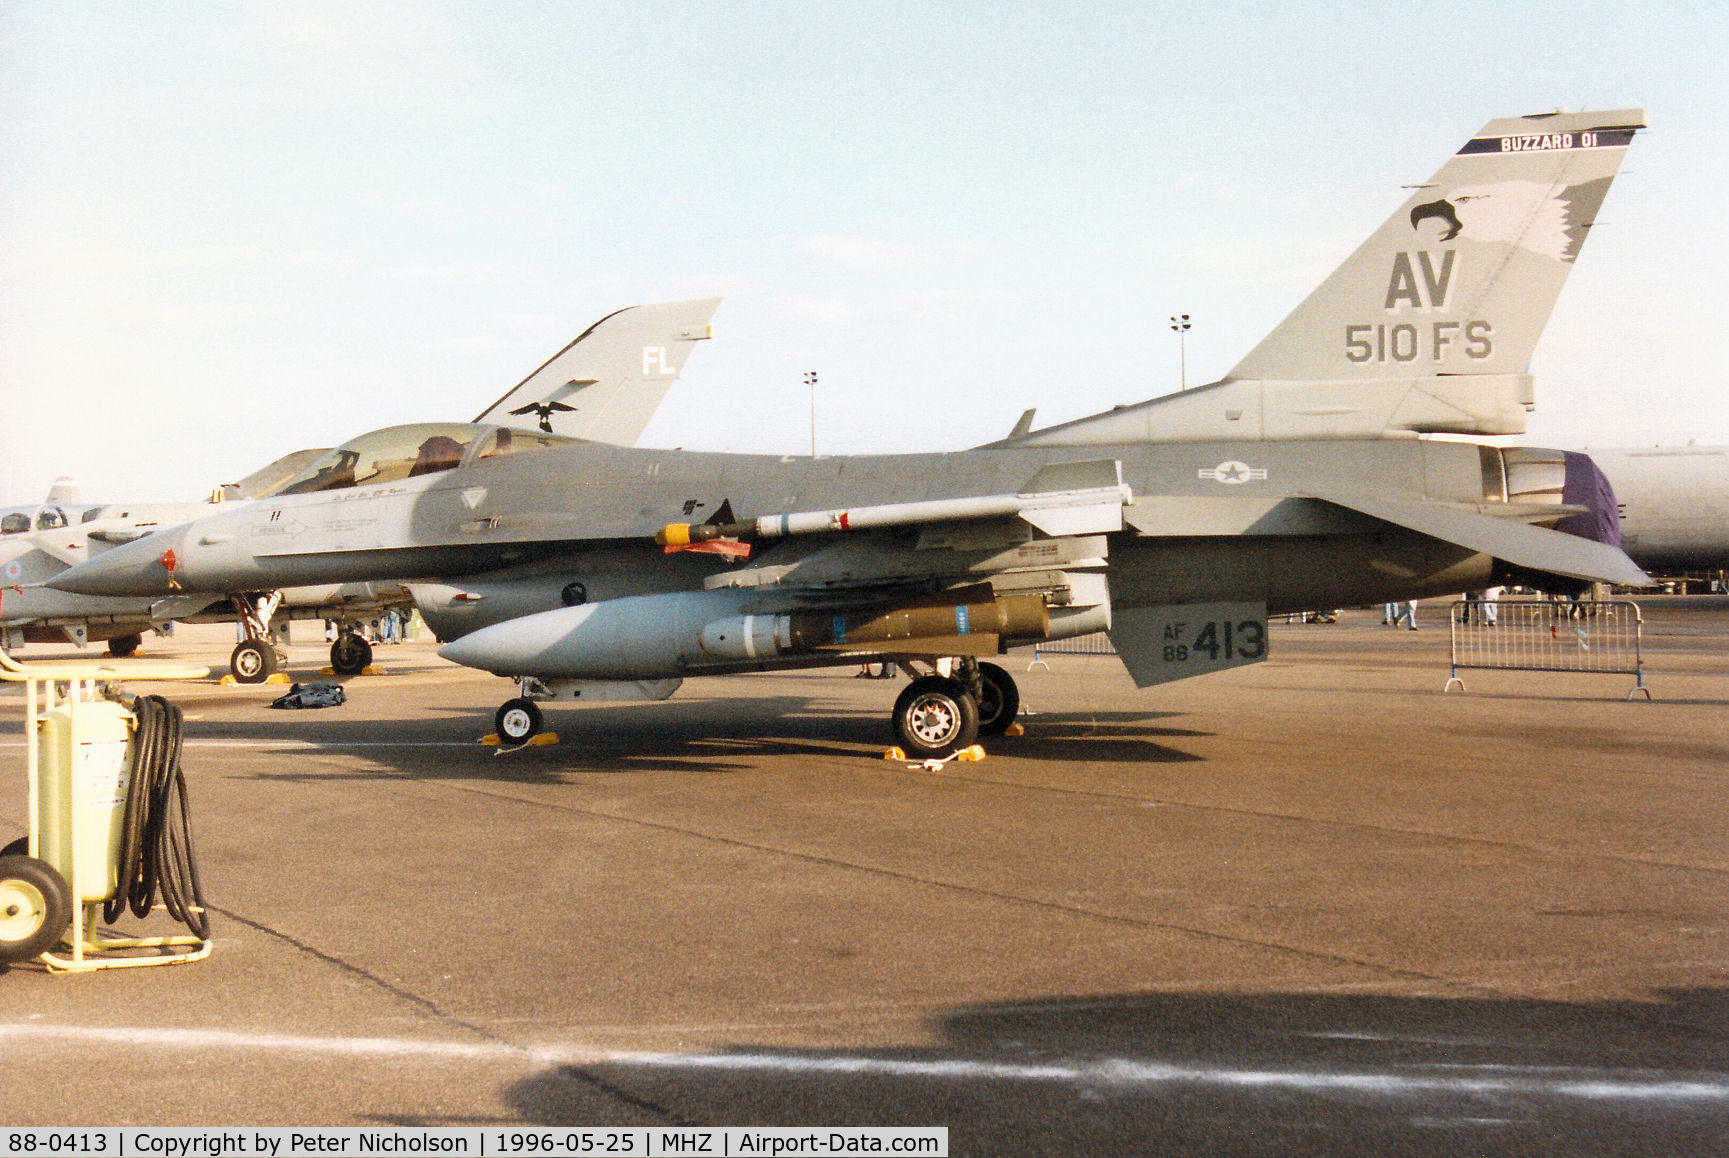 88-0413, 1988 General Dynamics F-16C Fighting Falcon C/N 1C-15, F-16C Falcon of 510th Fighter Squadron/31st Fighter Wing at Aviano on display at the 1996 RAF Mildenhall Air Fete.